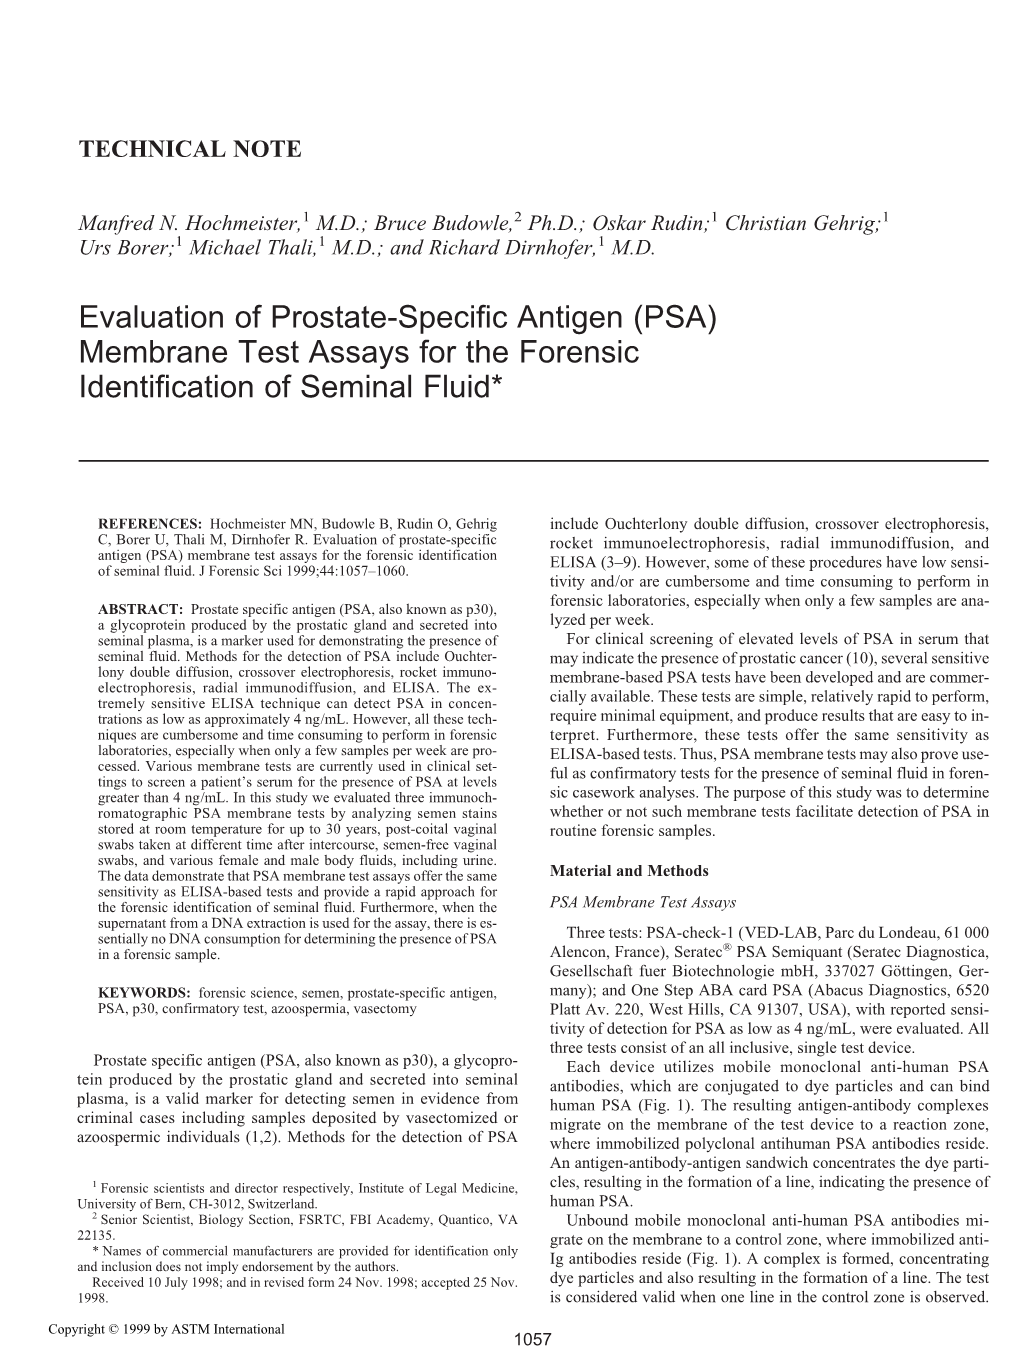 PSA) Membrane Test Assays for the Forensic Identification of Seminal Fluid*